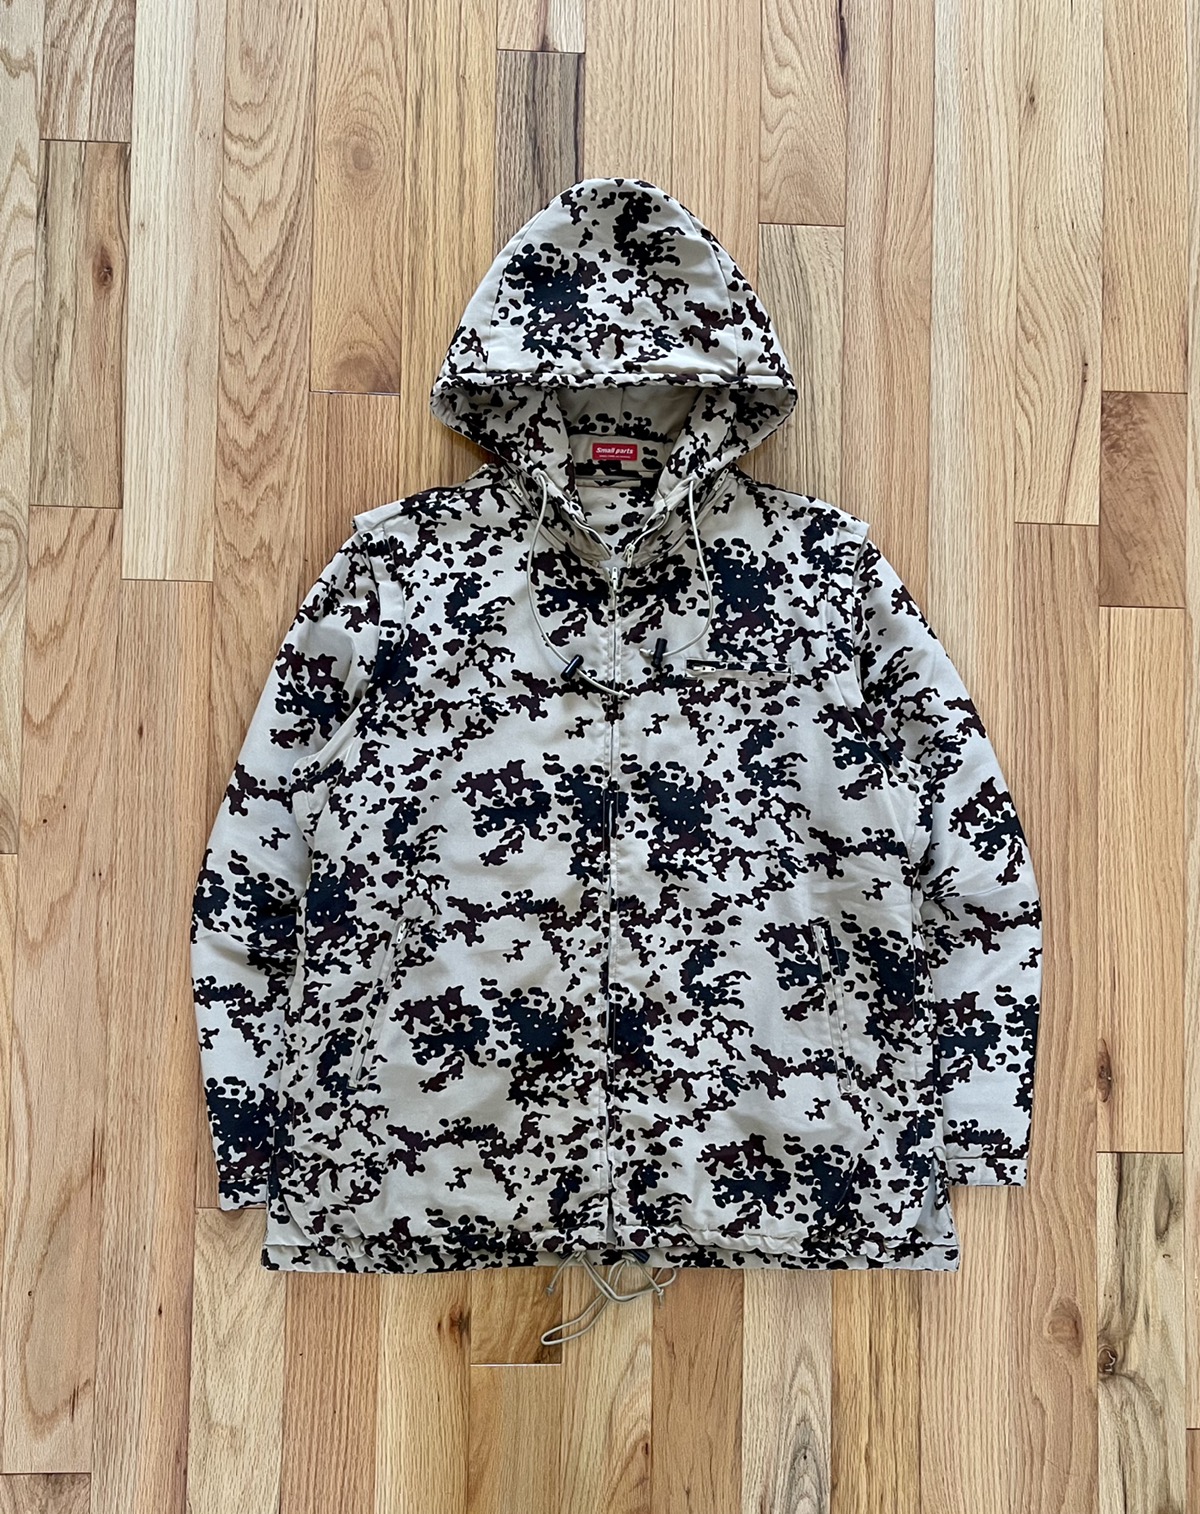 AW1998 Undercover Small Parts Digital Camo Detachable Jacket